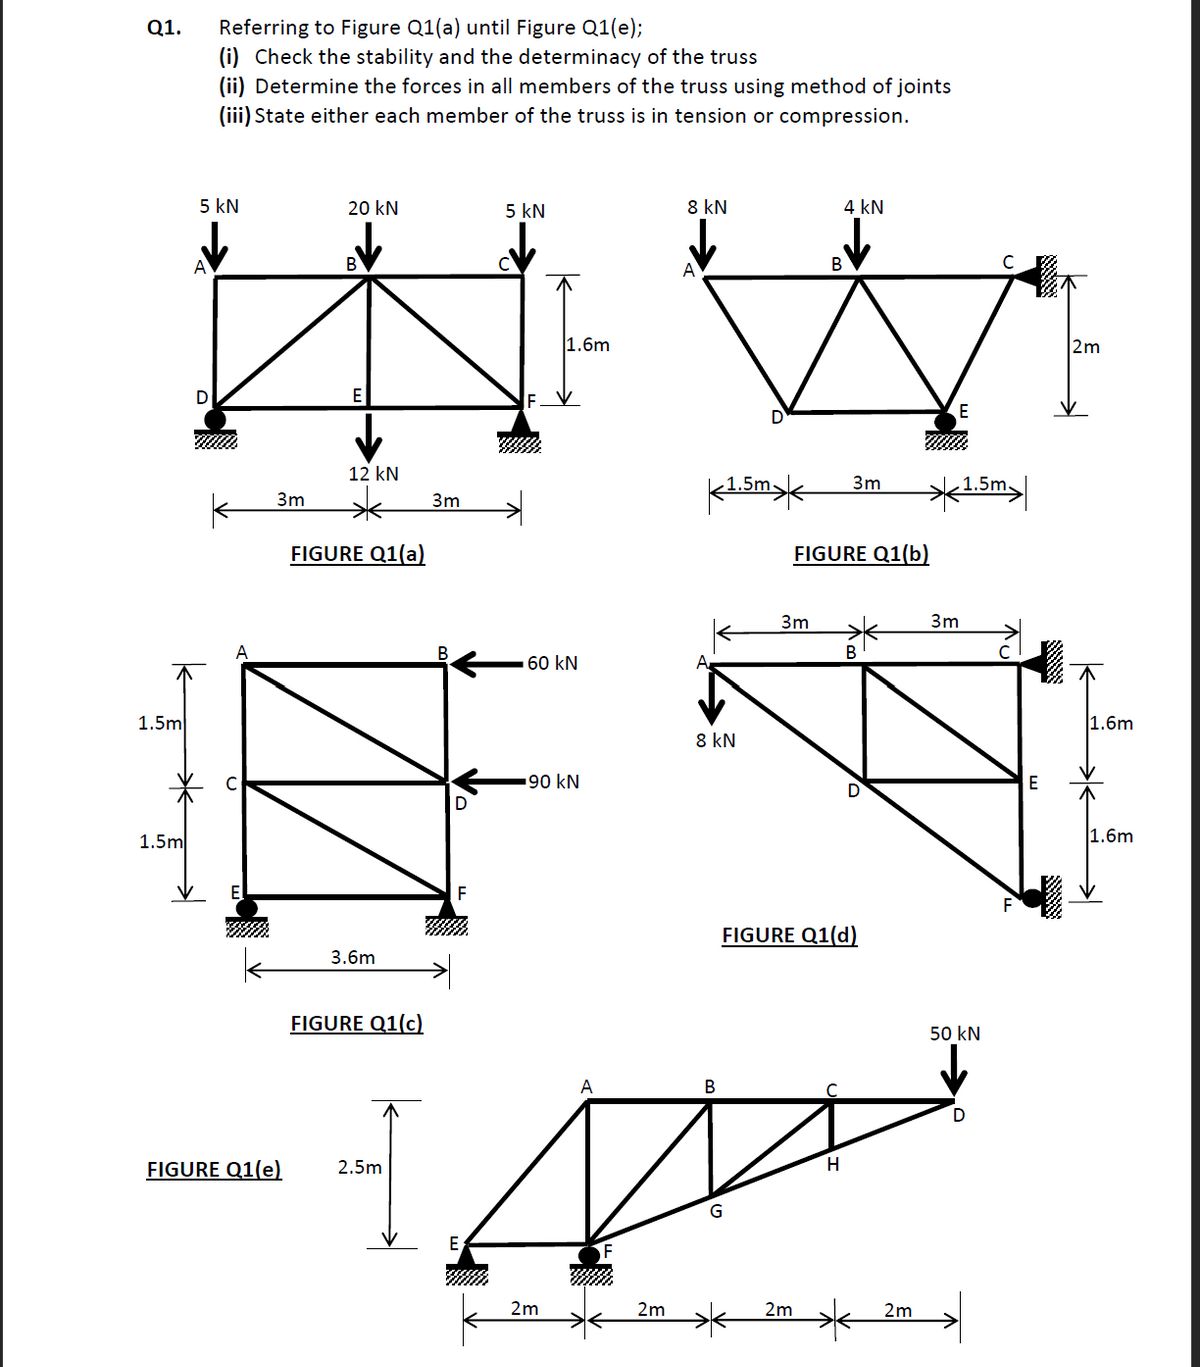 Q1.
1.5m
1.5m
Referring to Figure Q1(a) until Figure Q1(e);
(i) Check the stability and the determinacy of the truss
(ii) Determine the forces in all members of the truss using method of joints
(iii) State either each member of the truss is in tension or compression.
5 KN
D
к
E
3m
FIGURE Q1(e)
20 kN
E
12 kN
FIGURE Q1(a)
3.6m
FIGURE Q1(c)
2.5m
3m
D
5 KN
E
1.6m
60 kN
90 kN
2m
8 kN
2m
1.5m
8 kN
3m
A
B
A
G
4 kN
FIGURE Q1(b)
2m
FIGURE Q1(d)
3m
H
2m
E
3m
1.5m
50 kN
D
E
2m
1.6m
1.6m